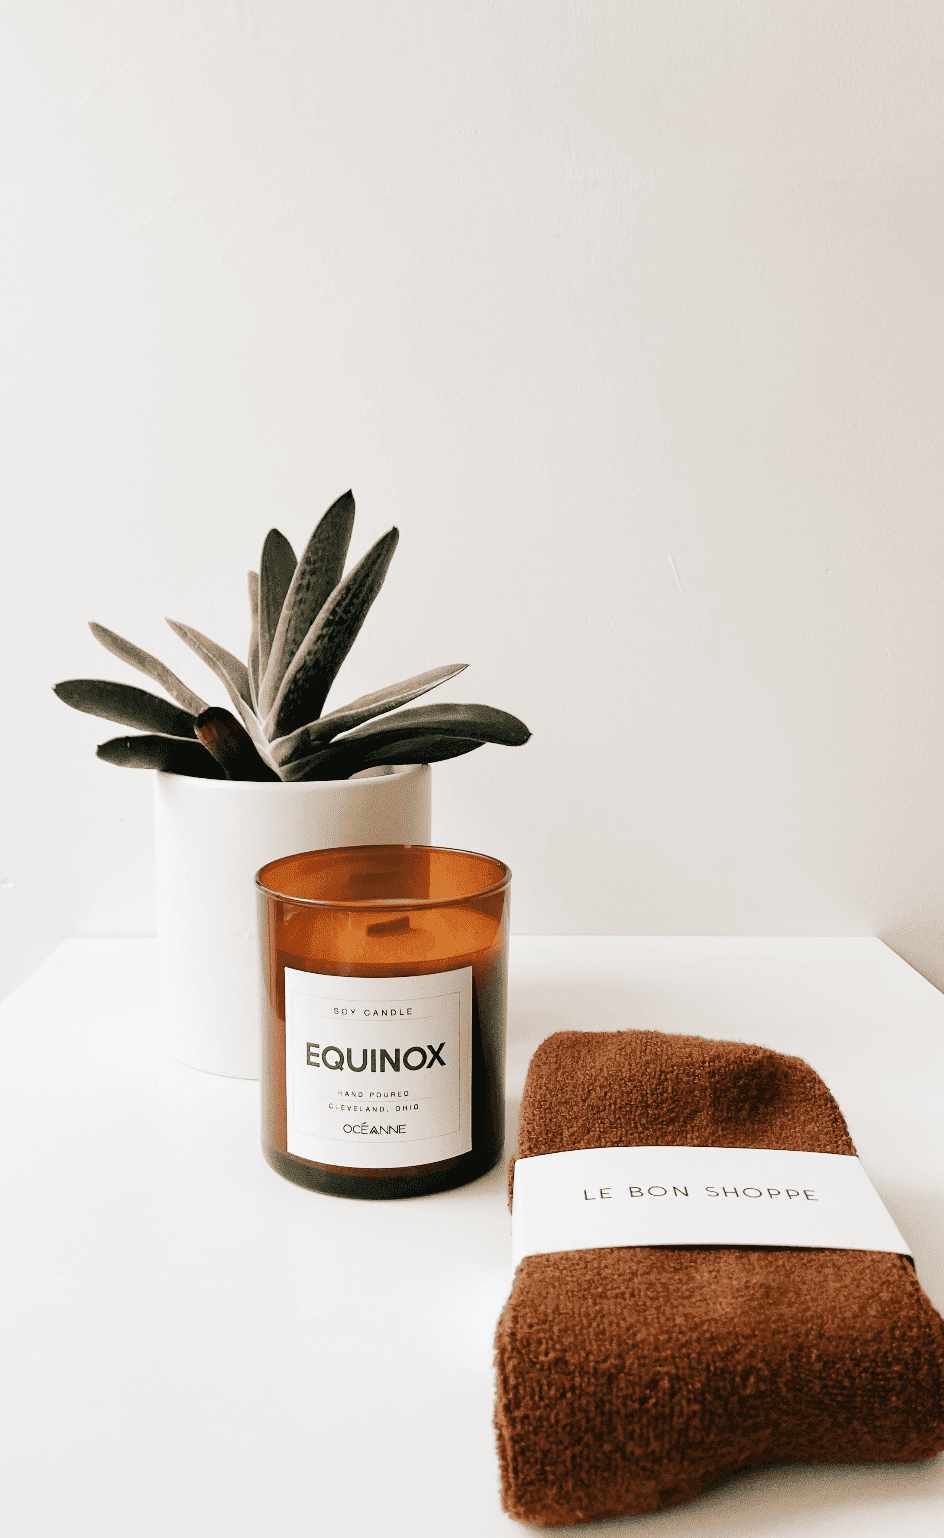 Equinox Soy Candle Candles + Incense